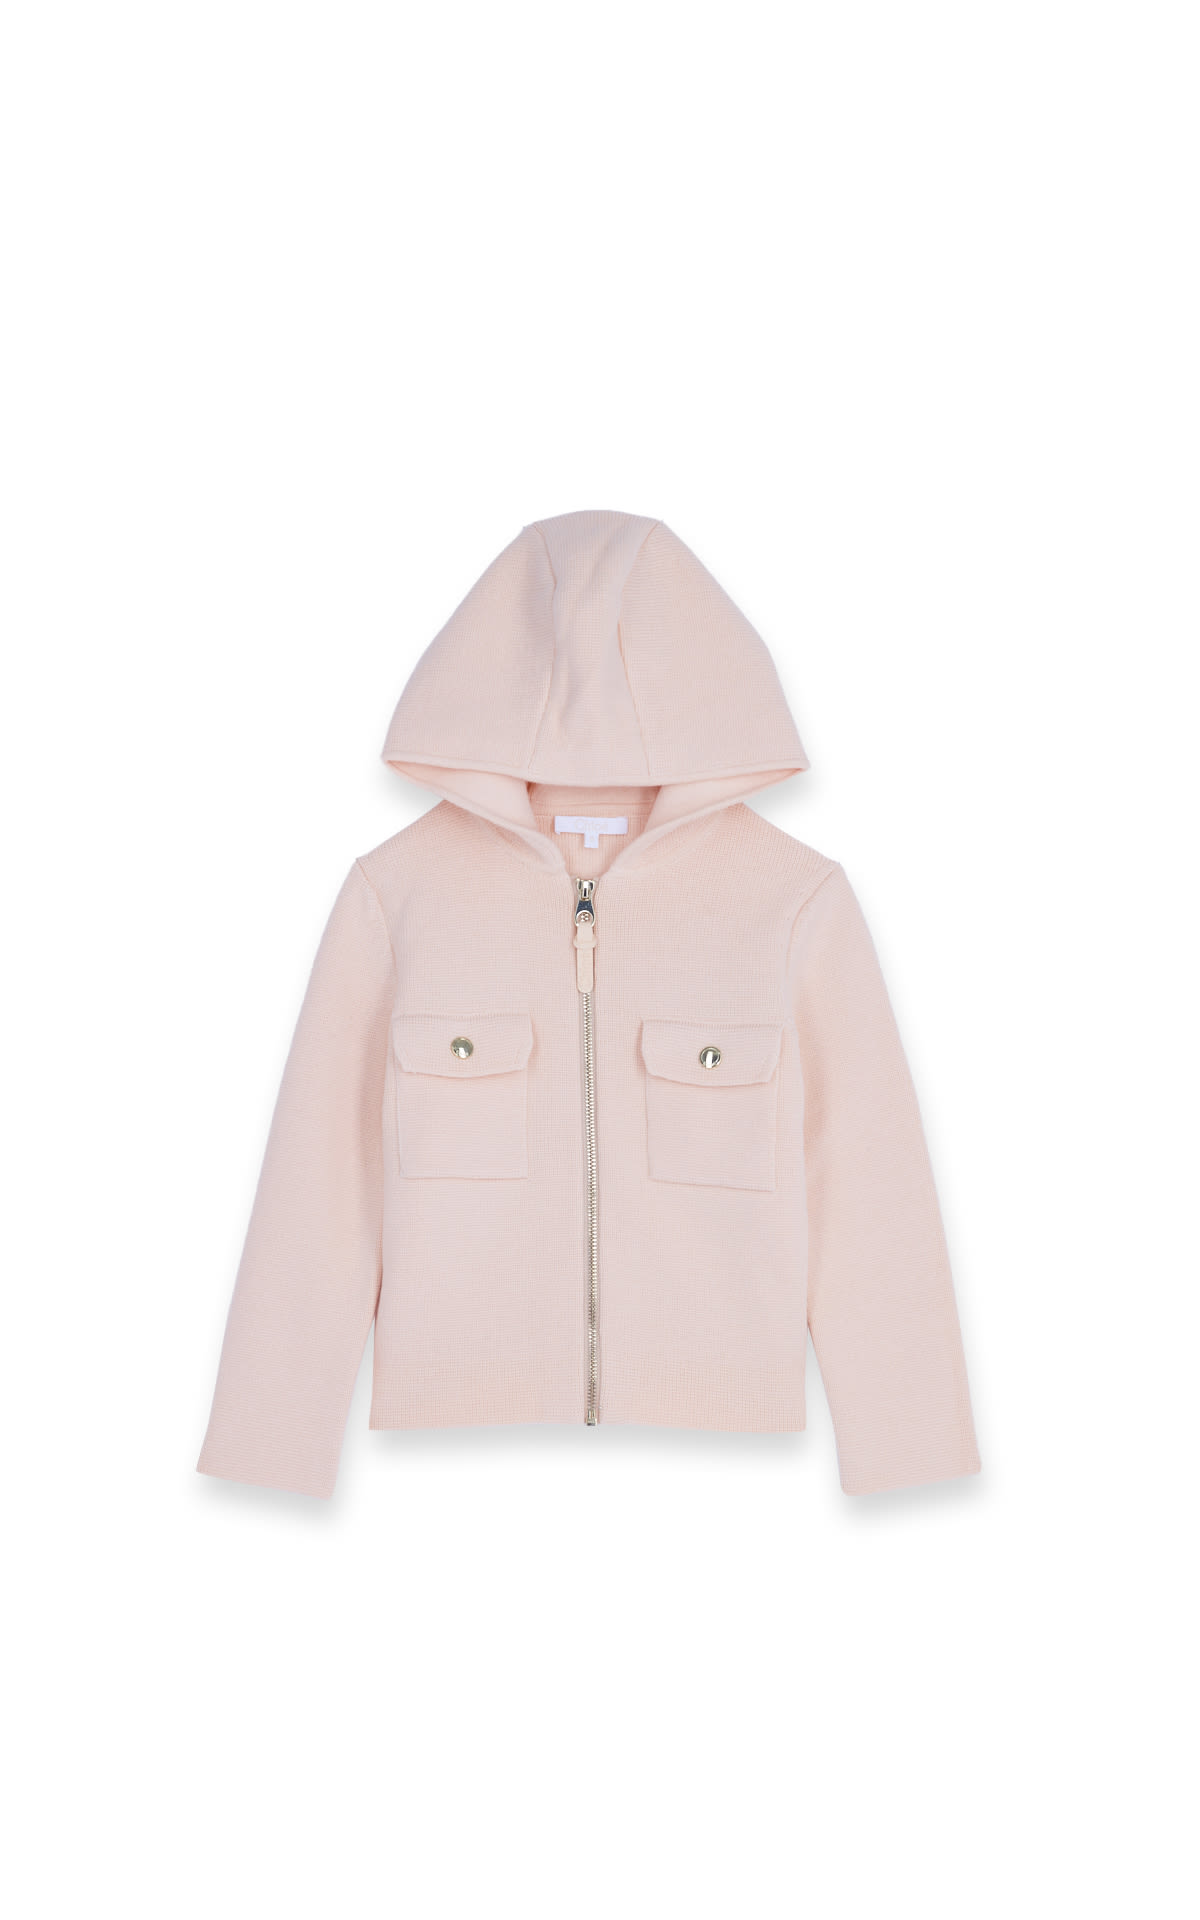 Chloé hooded cardigan with zipped pockets*